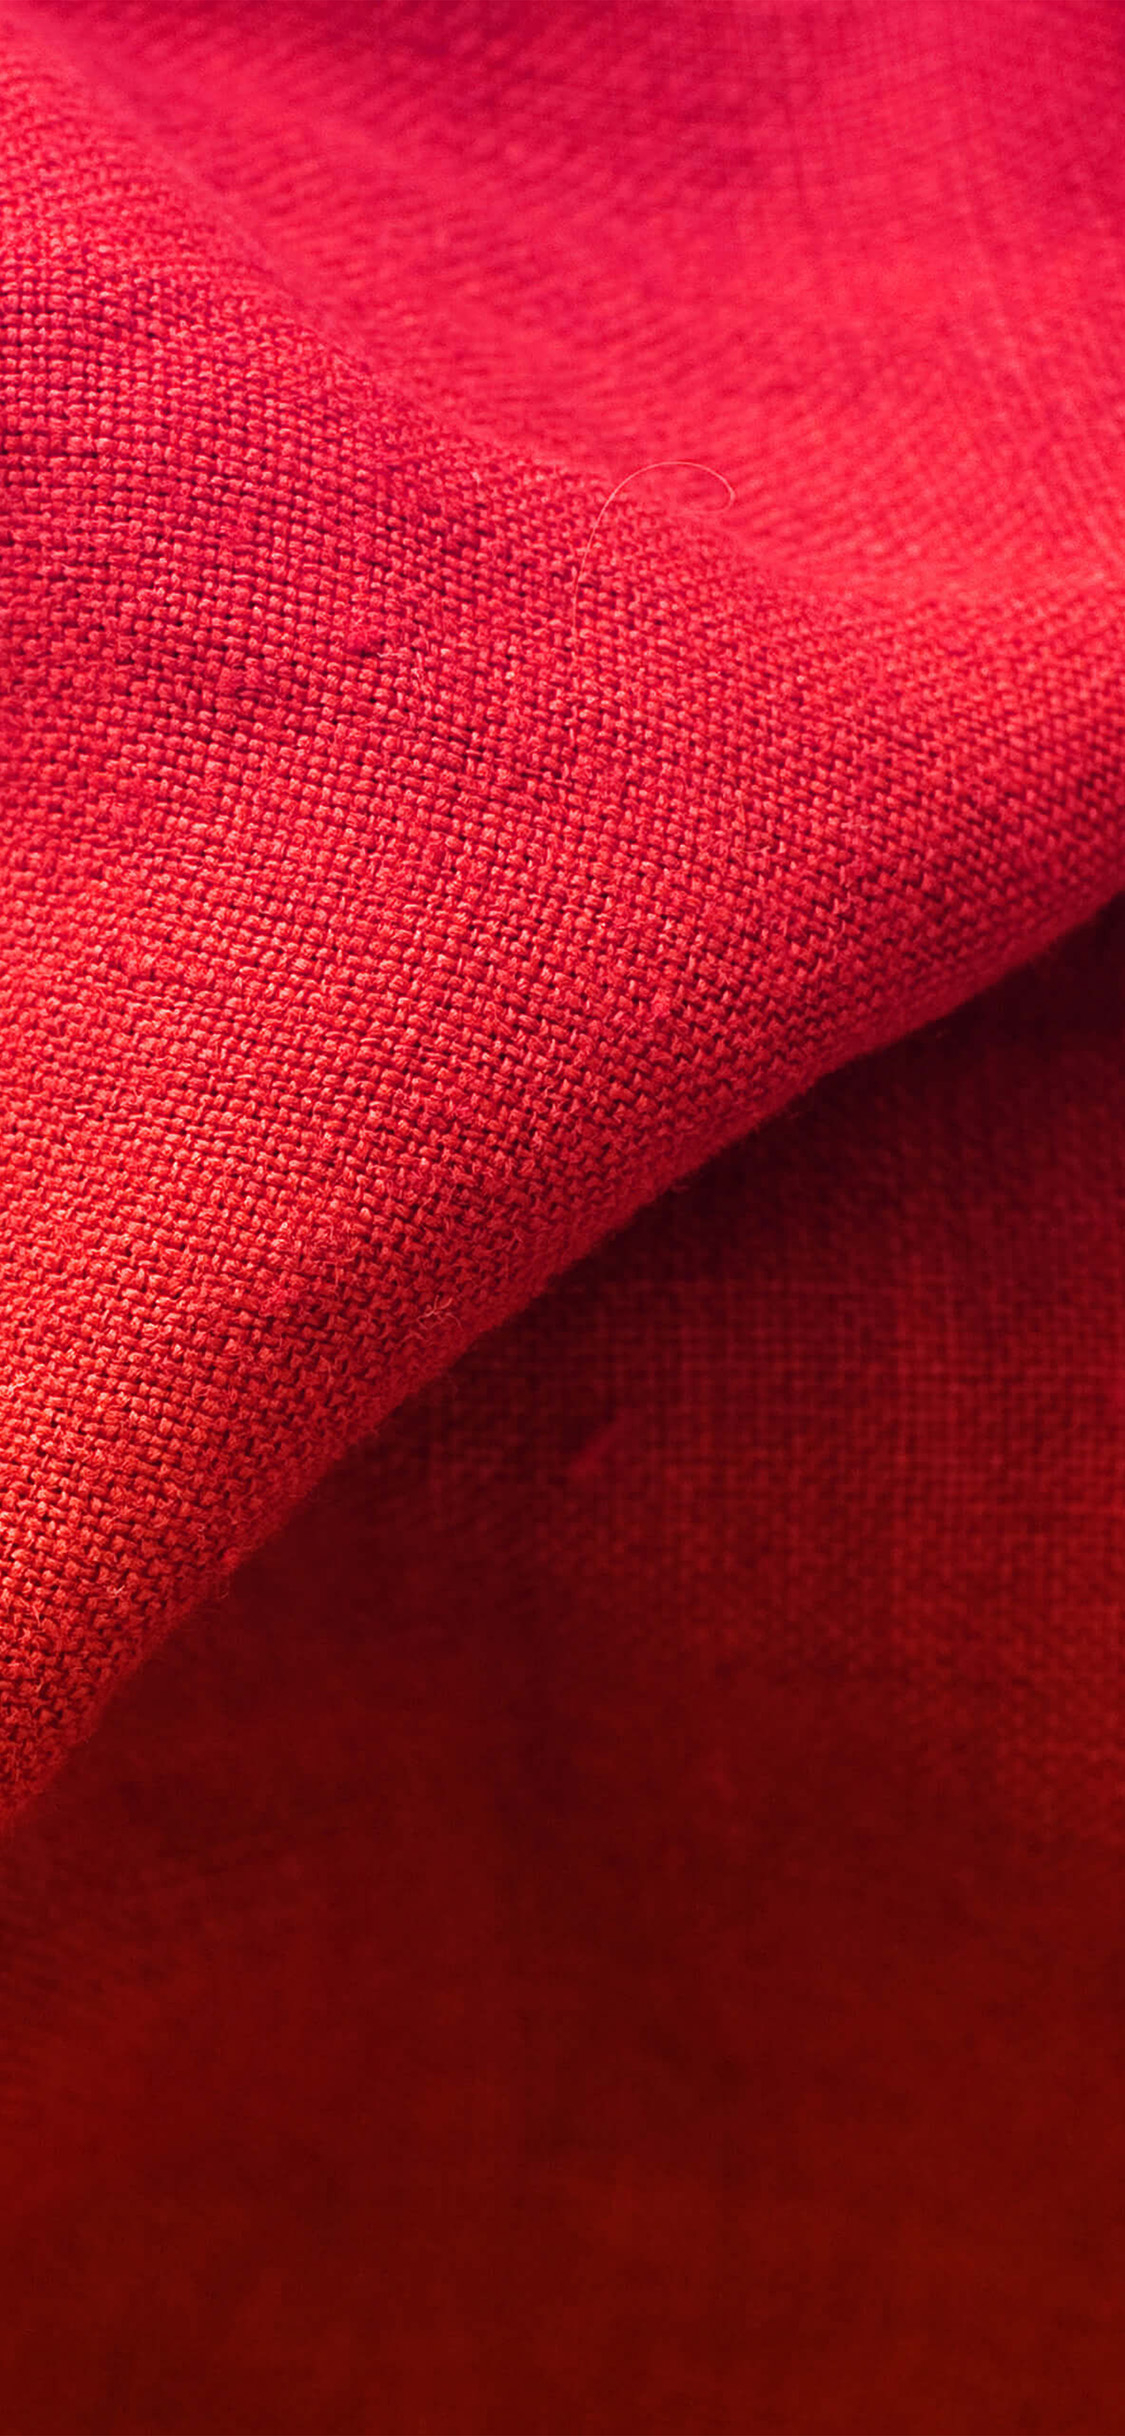 1125x2436 vz41-fabric-red-texture-pattern-background-wallpaper